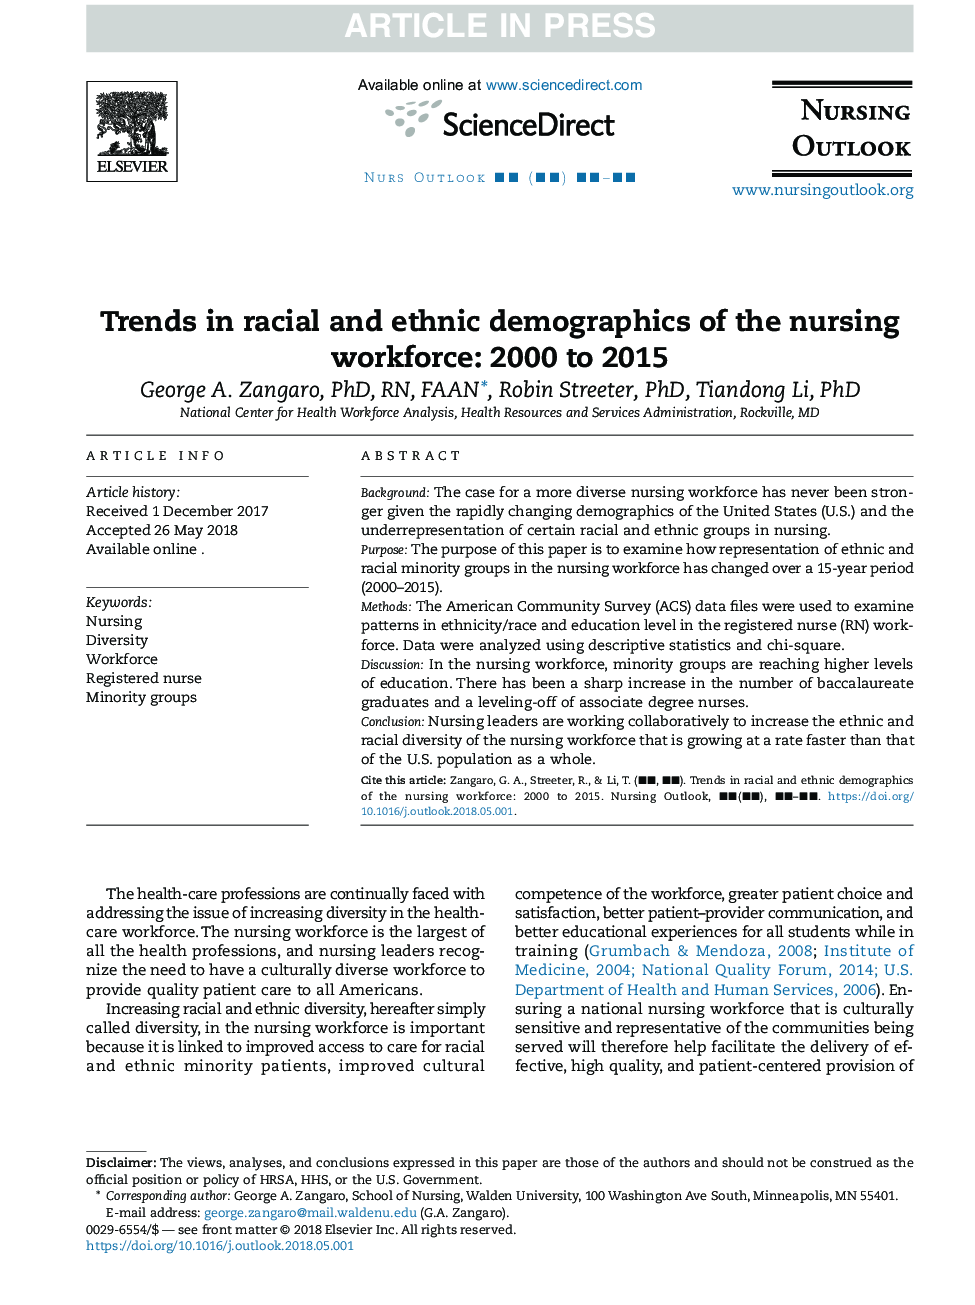 Trends in racial and ethnic demographics of the nursing workforce: 2000 to 2015